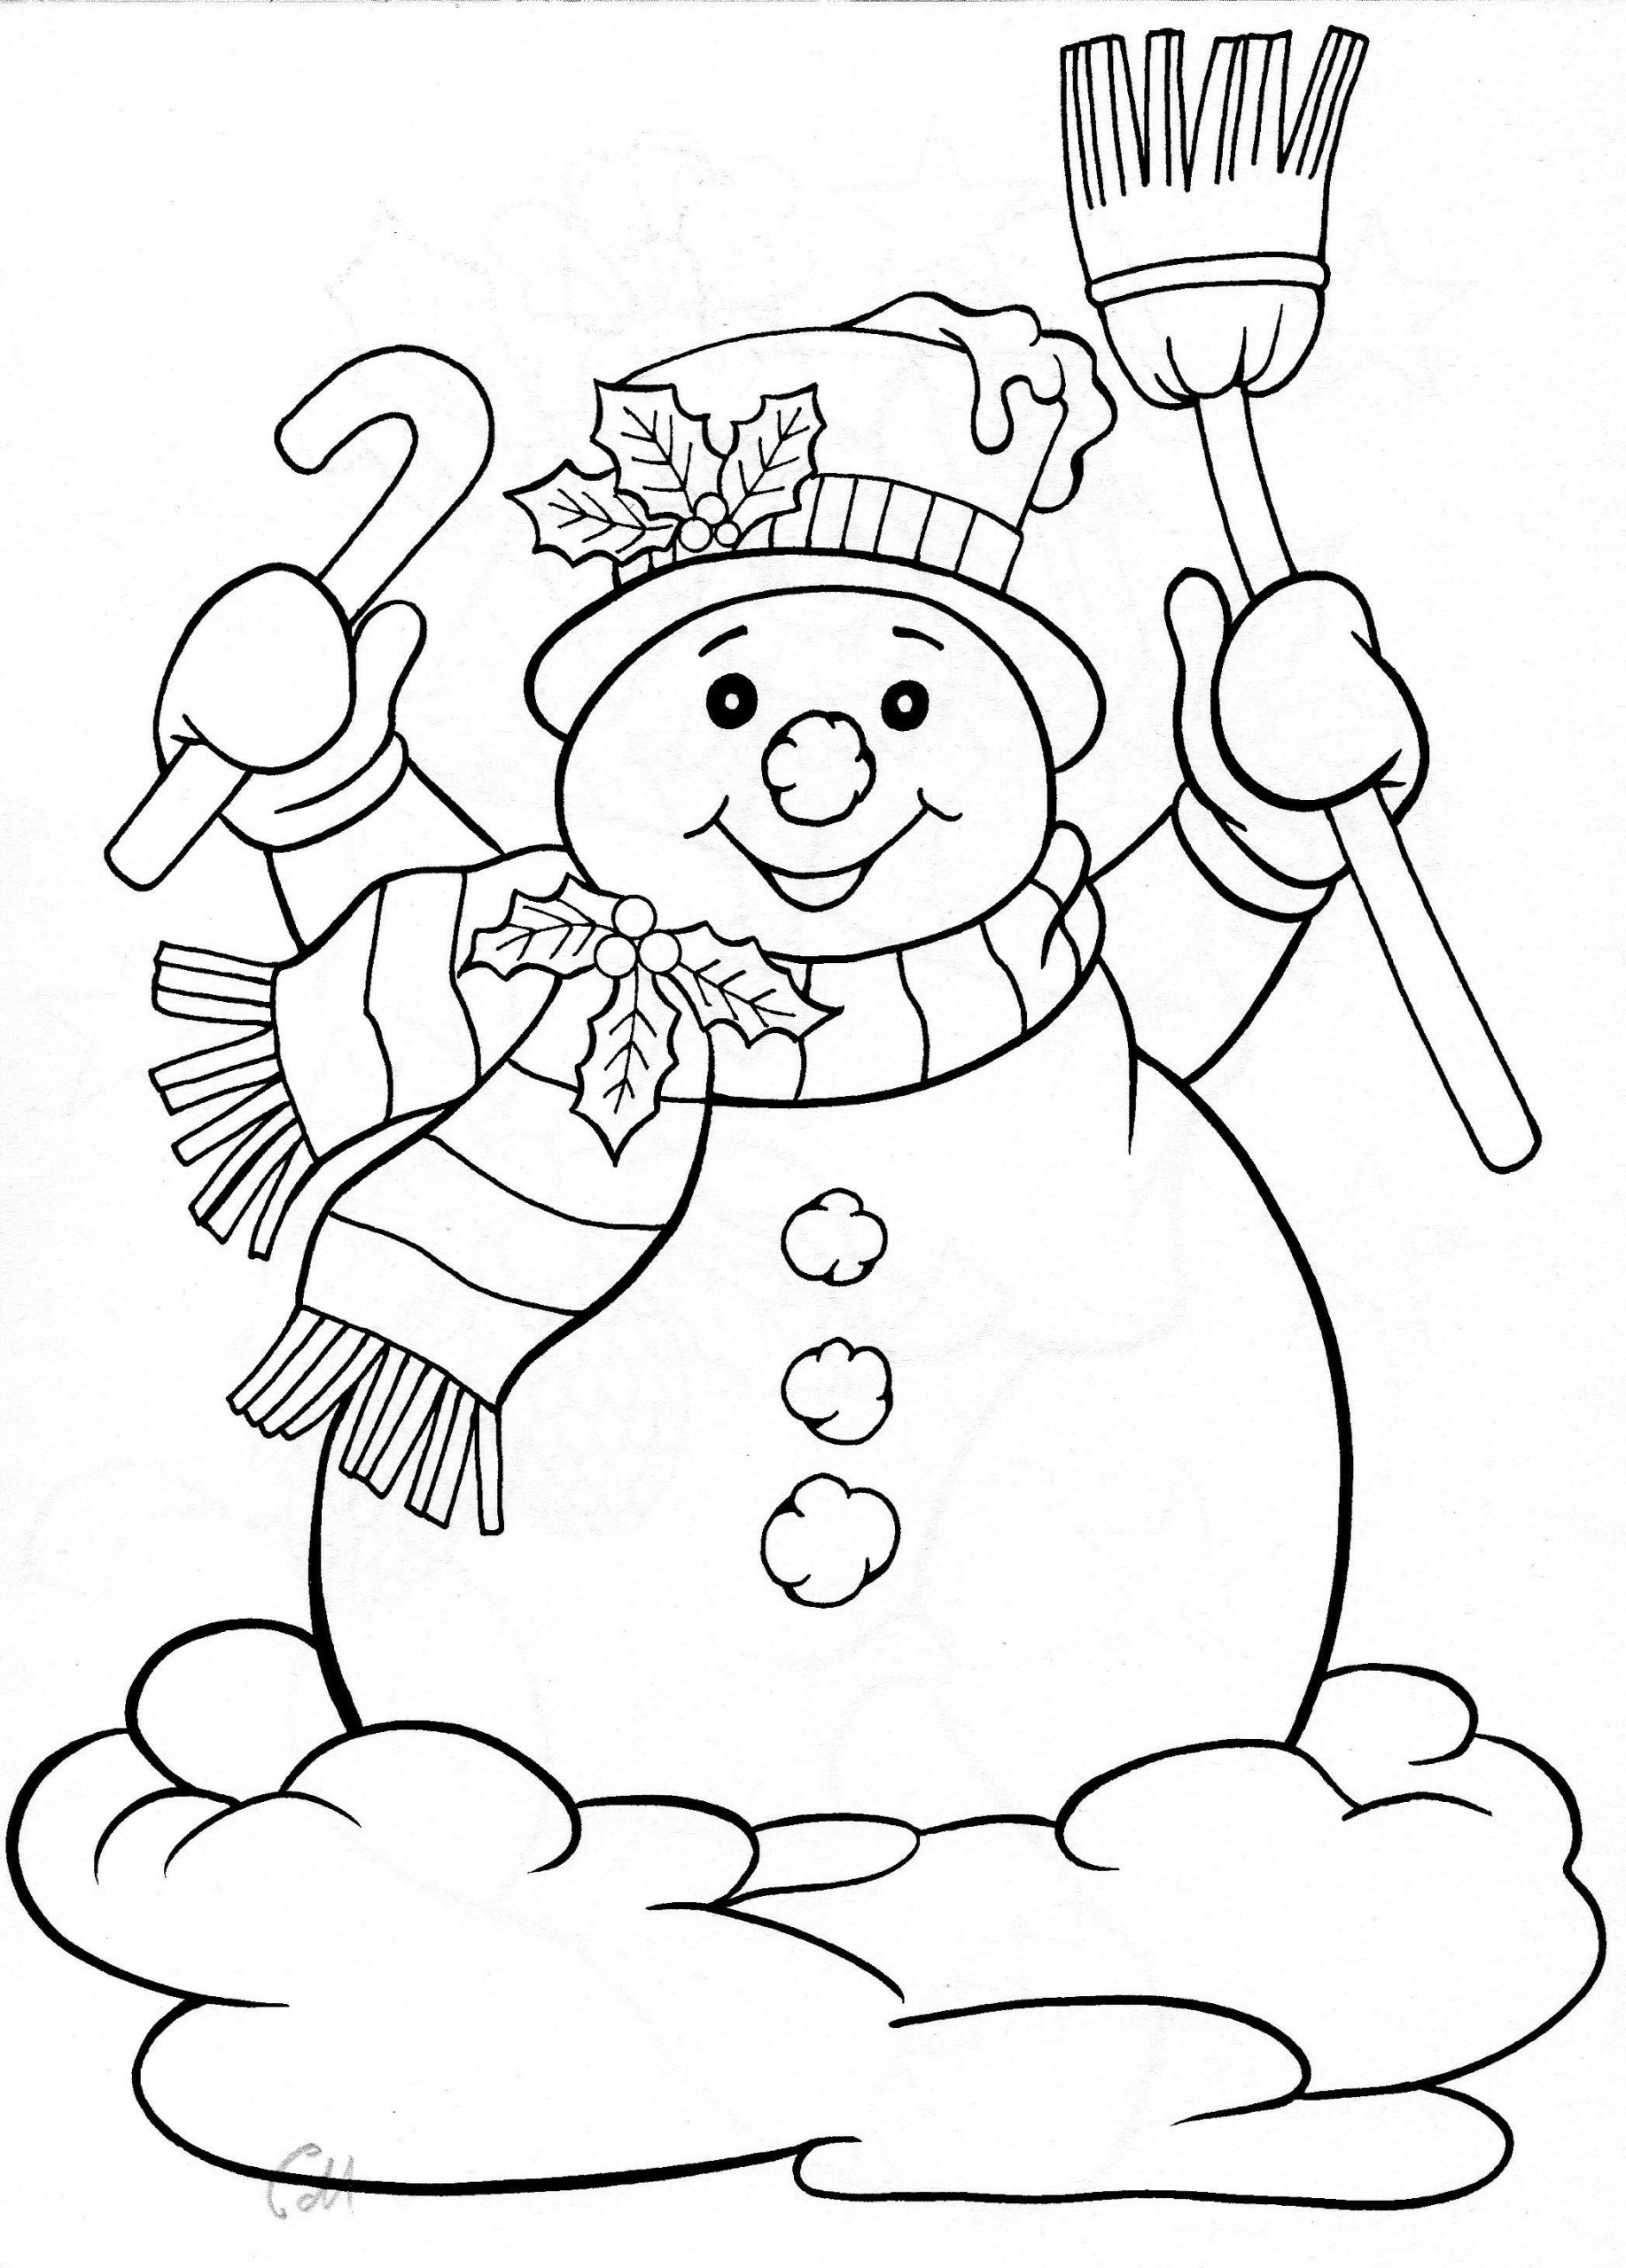 Coloring Pages : Holiday Coloring Pages Snowman Happy ...